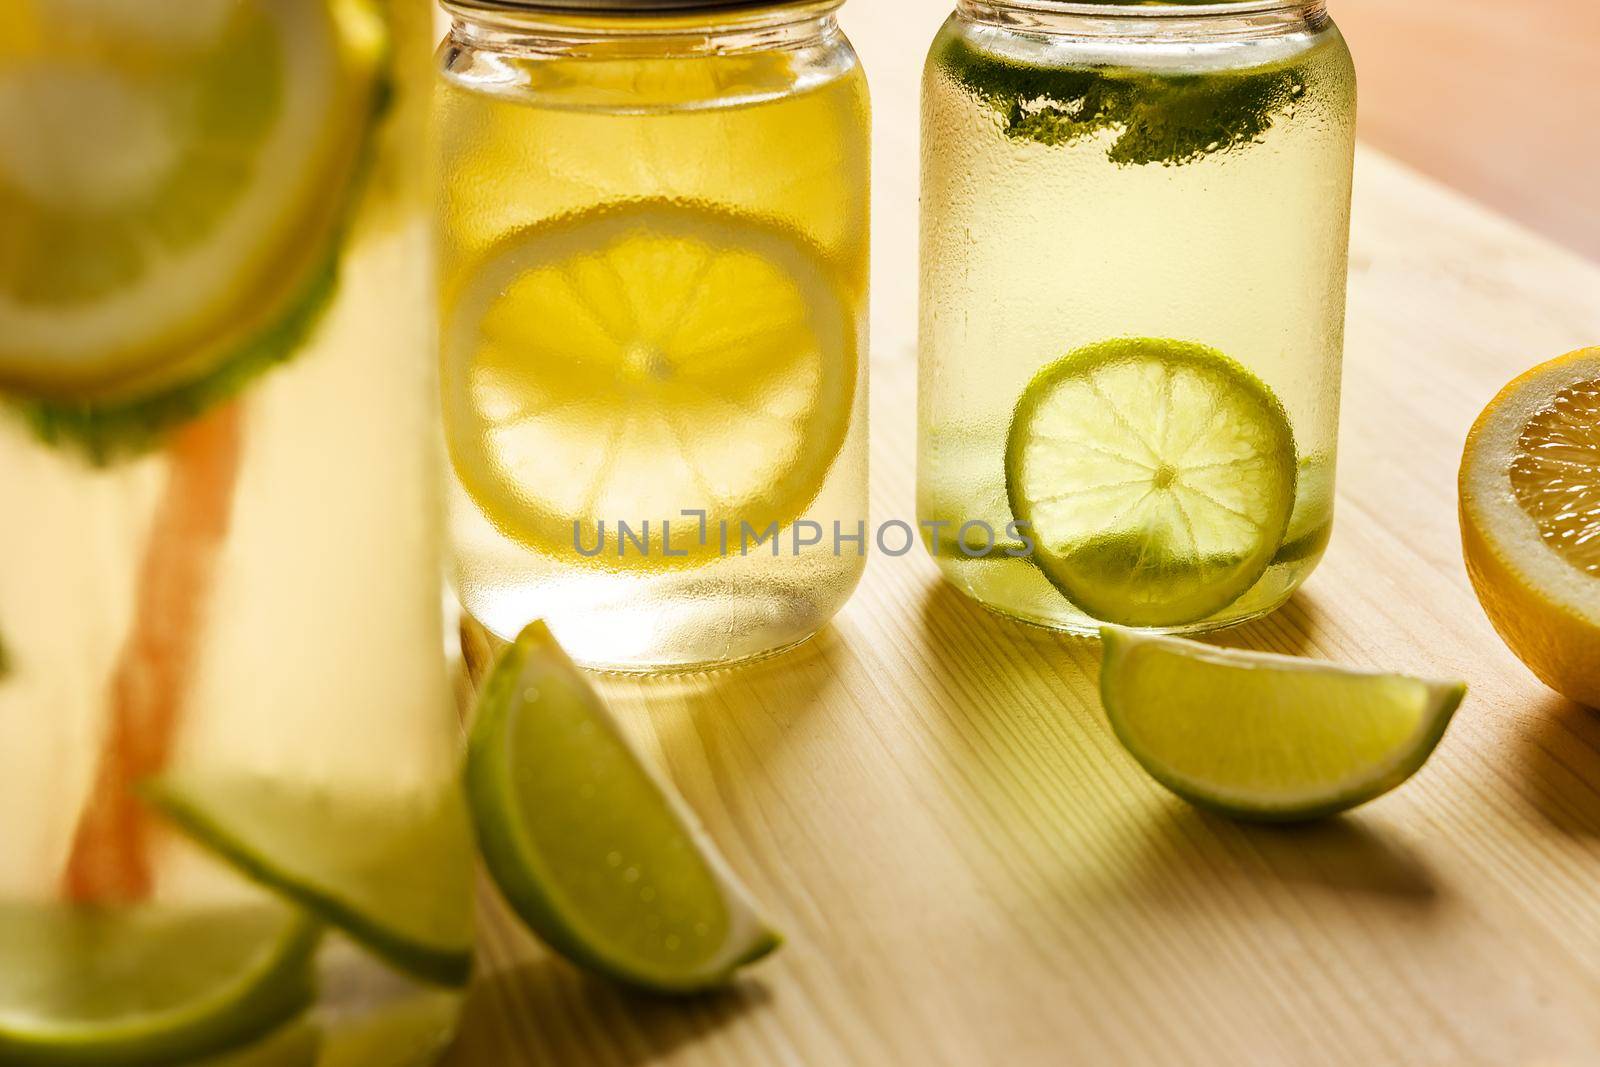 two glass jars with lids illuminated by sunlight with homemade lime and lemon sodas, on the wooden table there are also pieces of fruit and another unfocused lemonade in the foreground